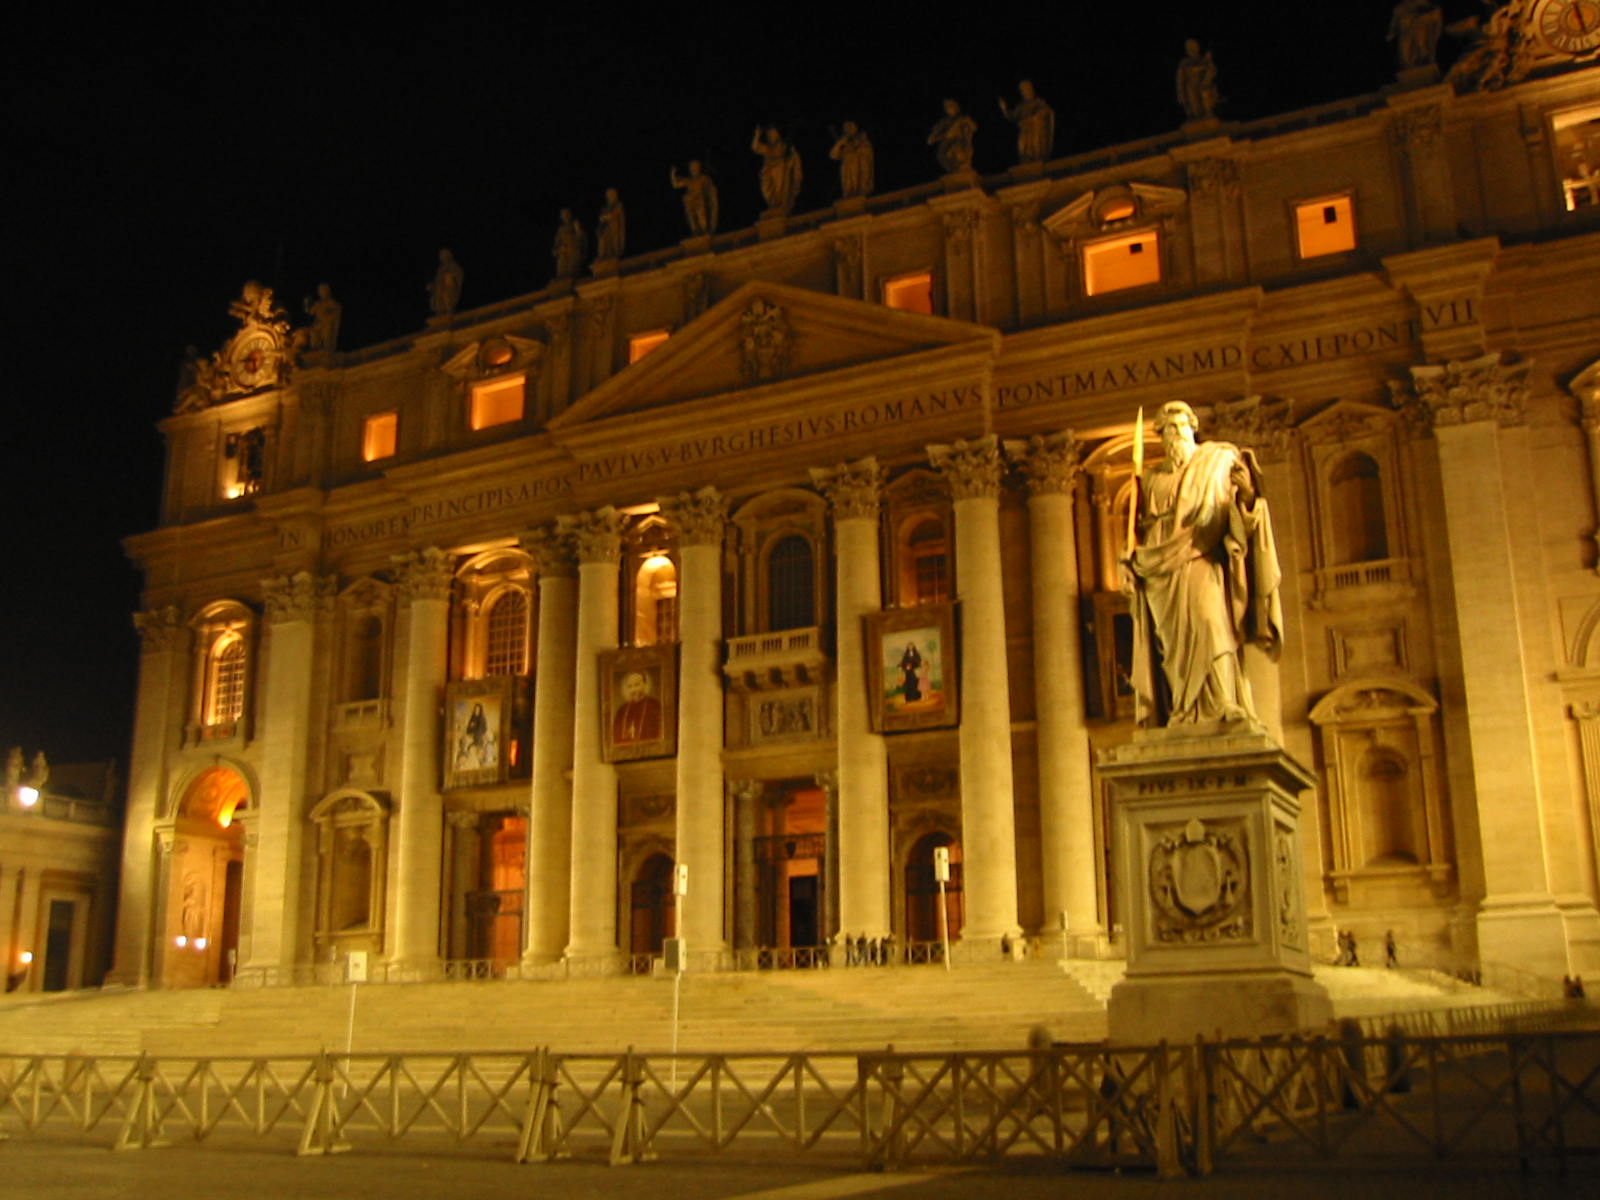 St. Peter's, at night